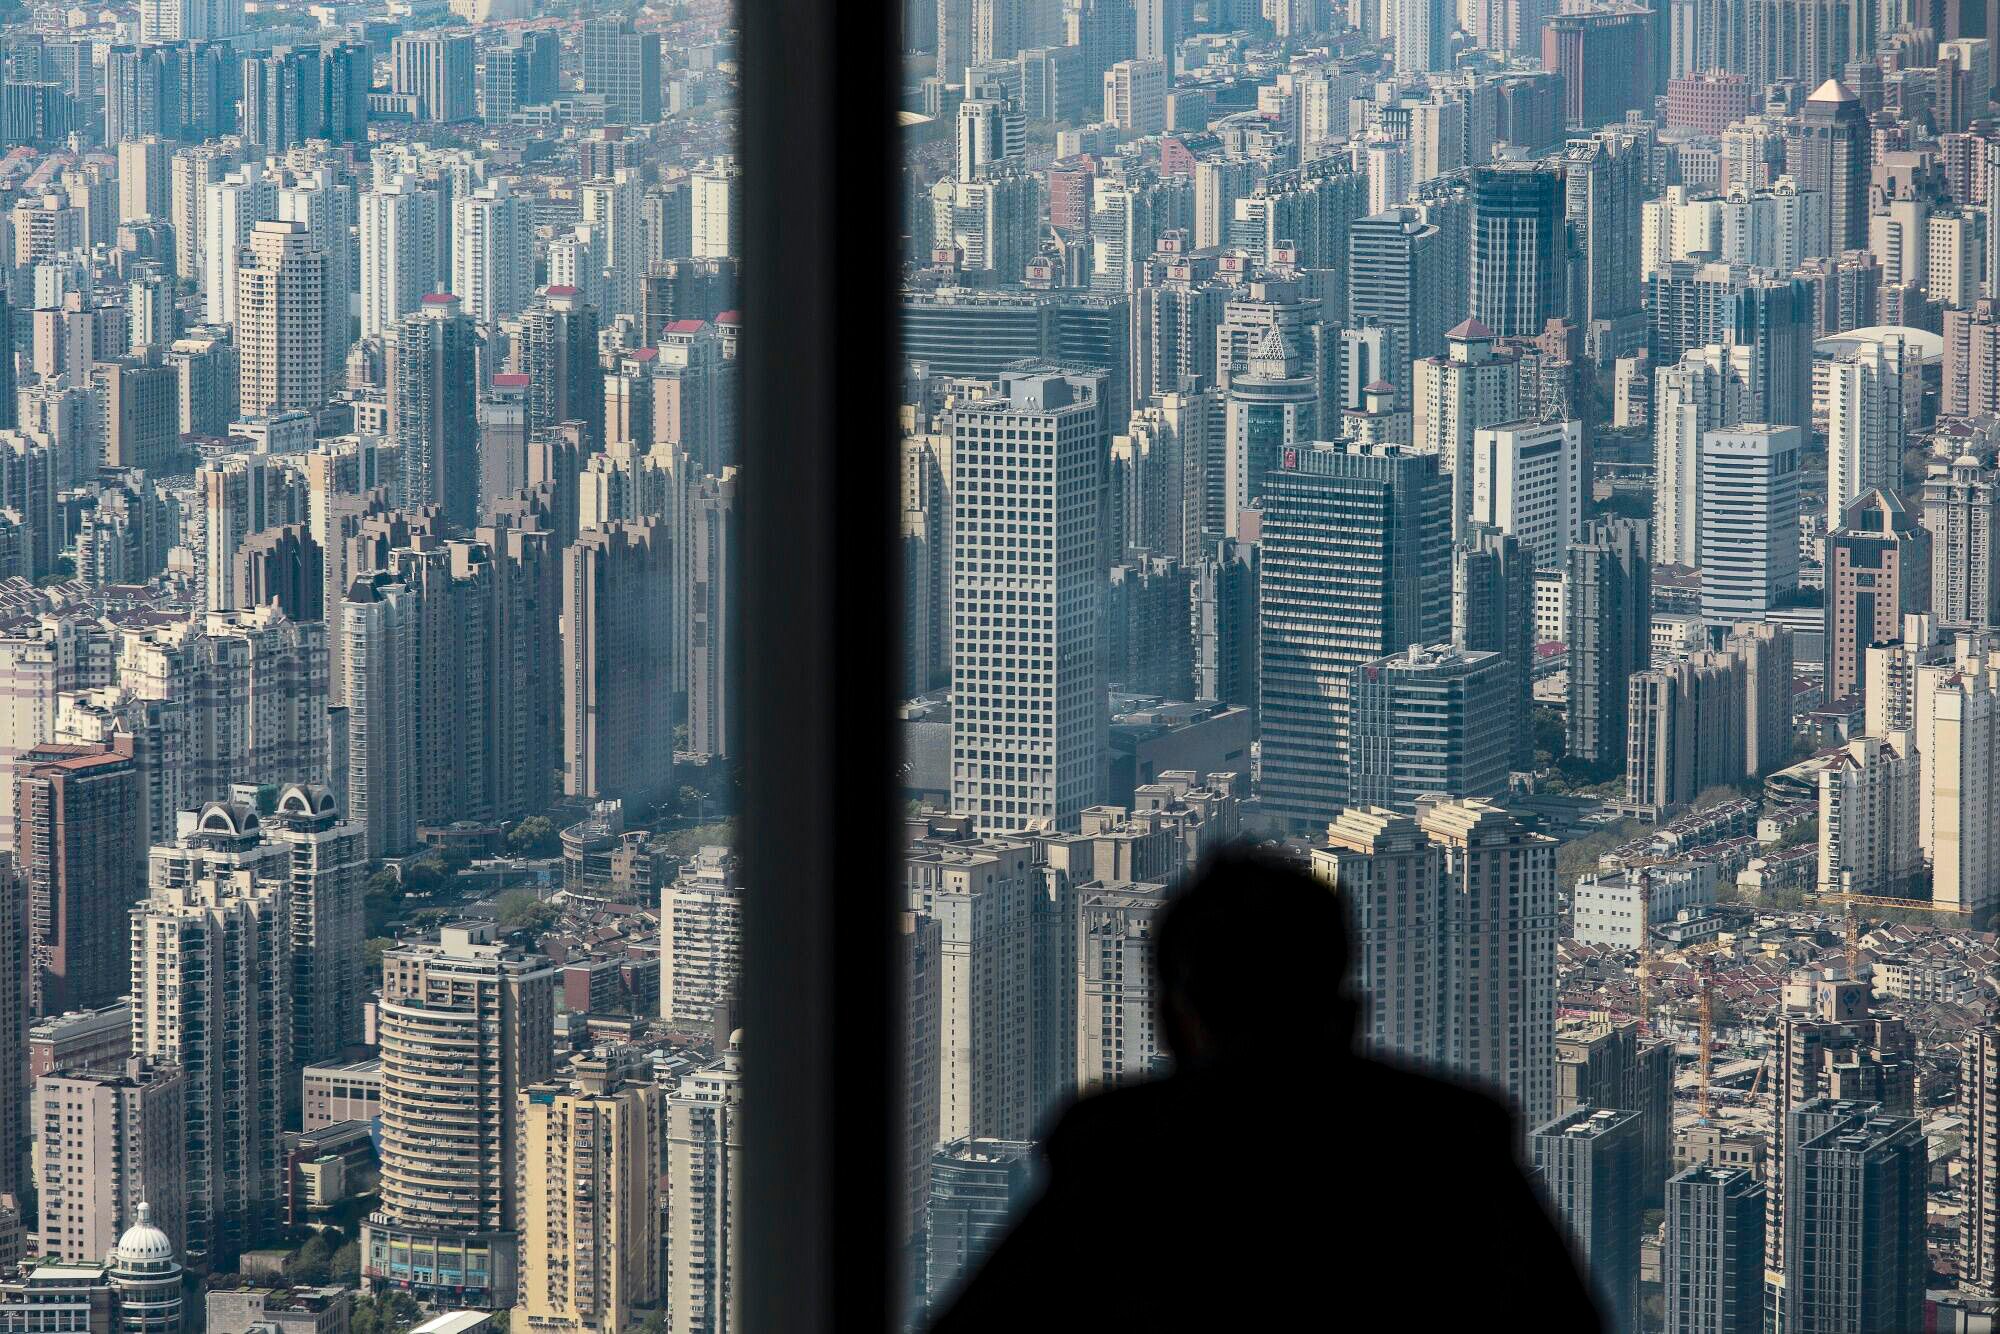 China’s worsening property sector continues to be the biggest drag on the nation’s economy. Photo: Bloomberg